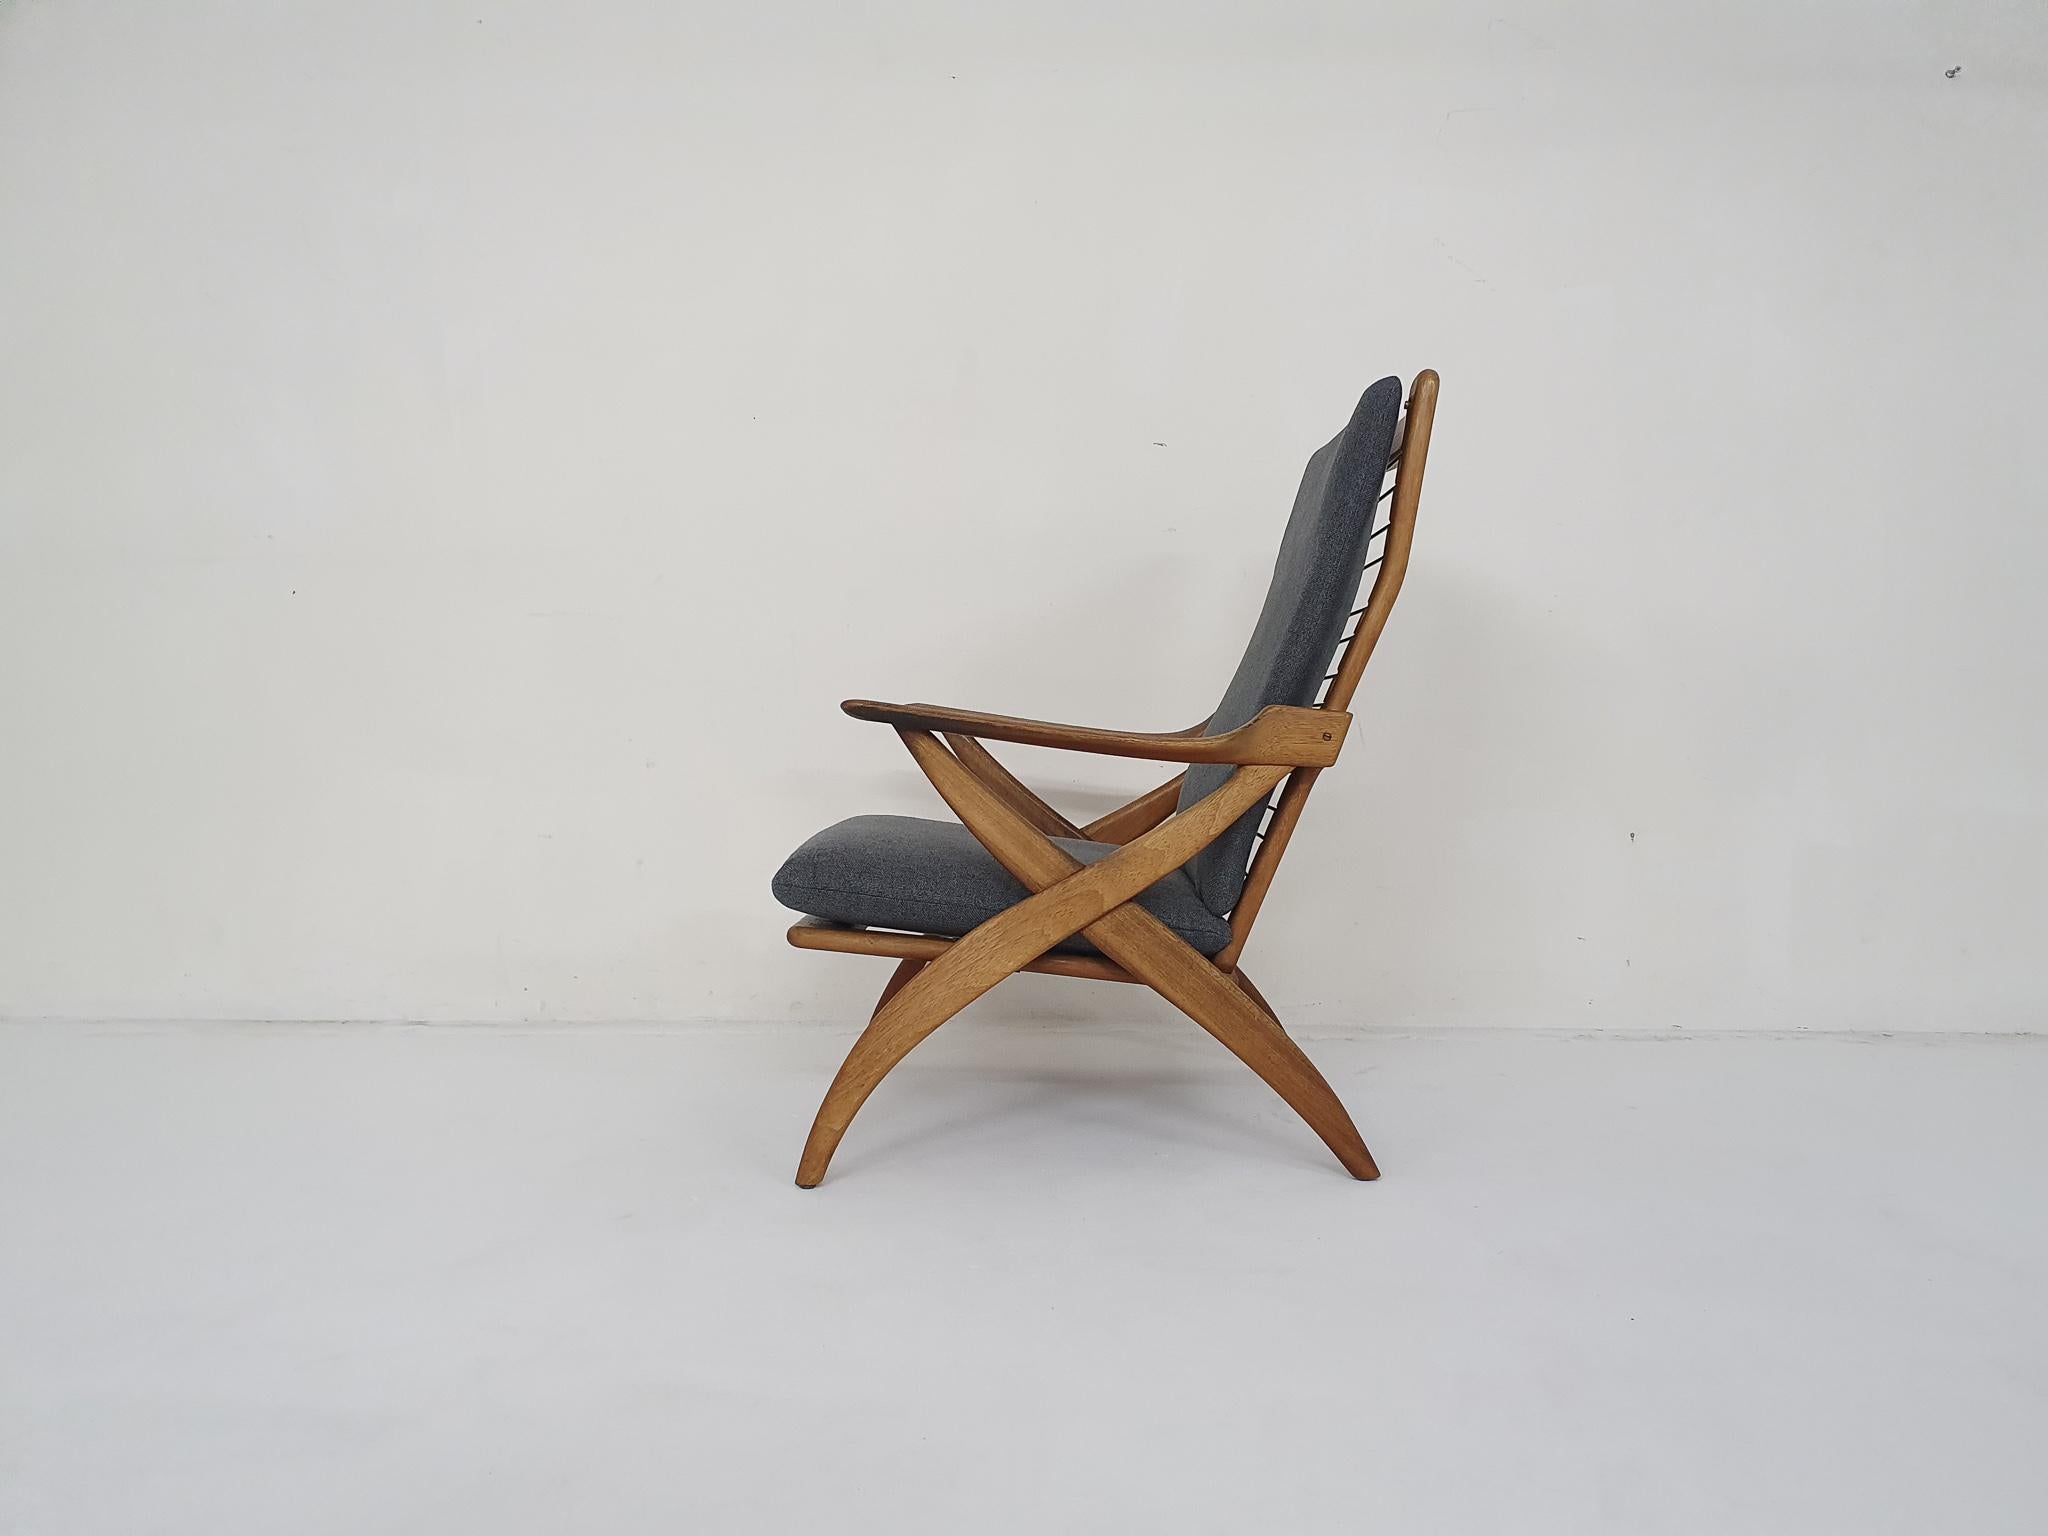 Fabric Mid-Century Teak Lounge Chair, by Topform, the Netherlands, 1950's